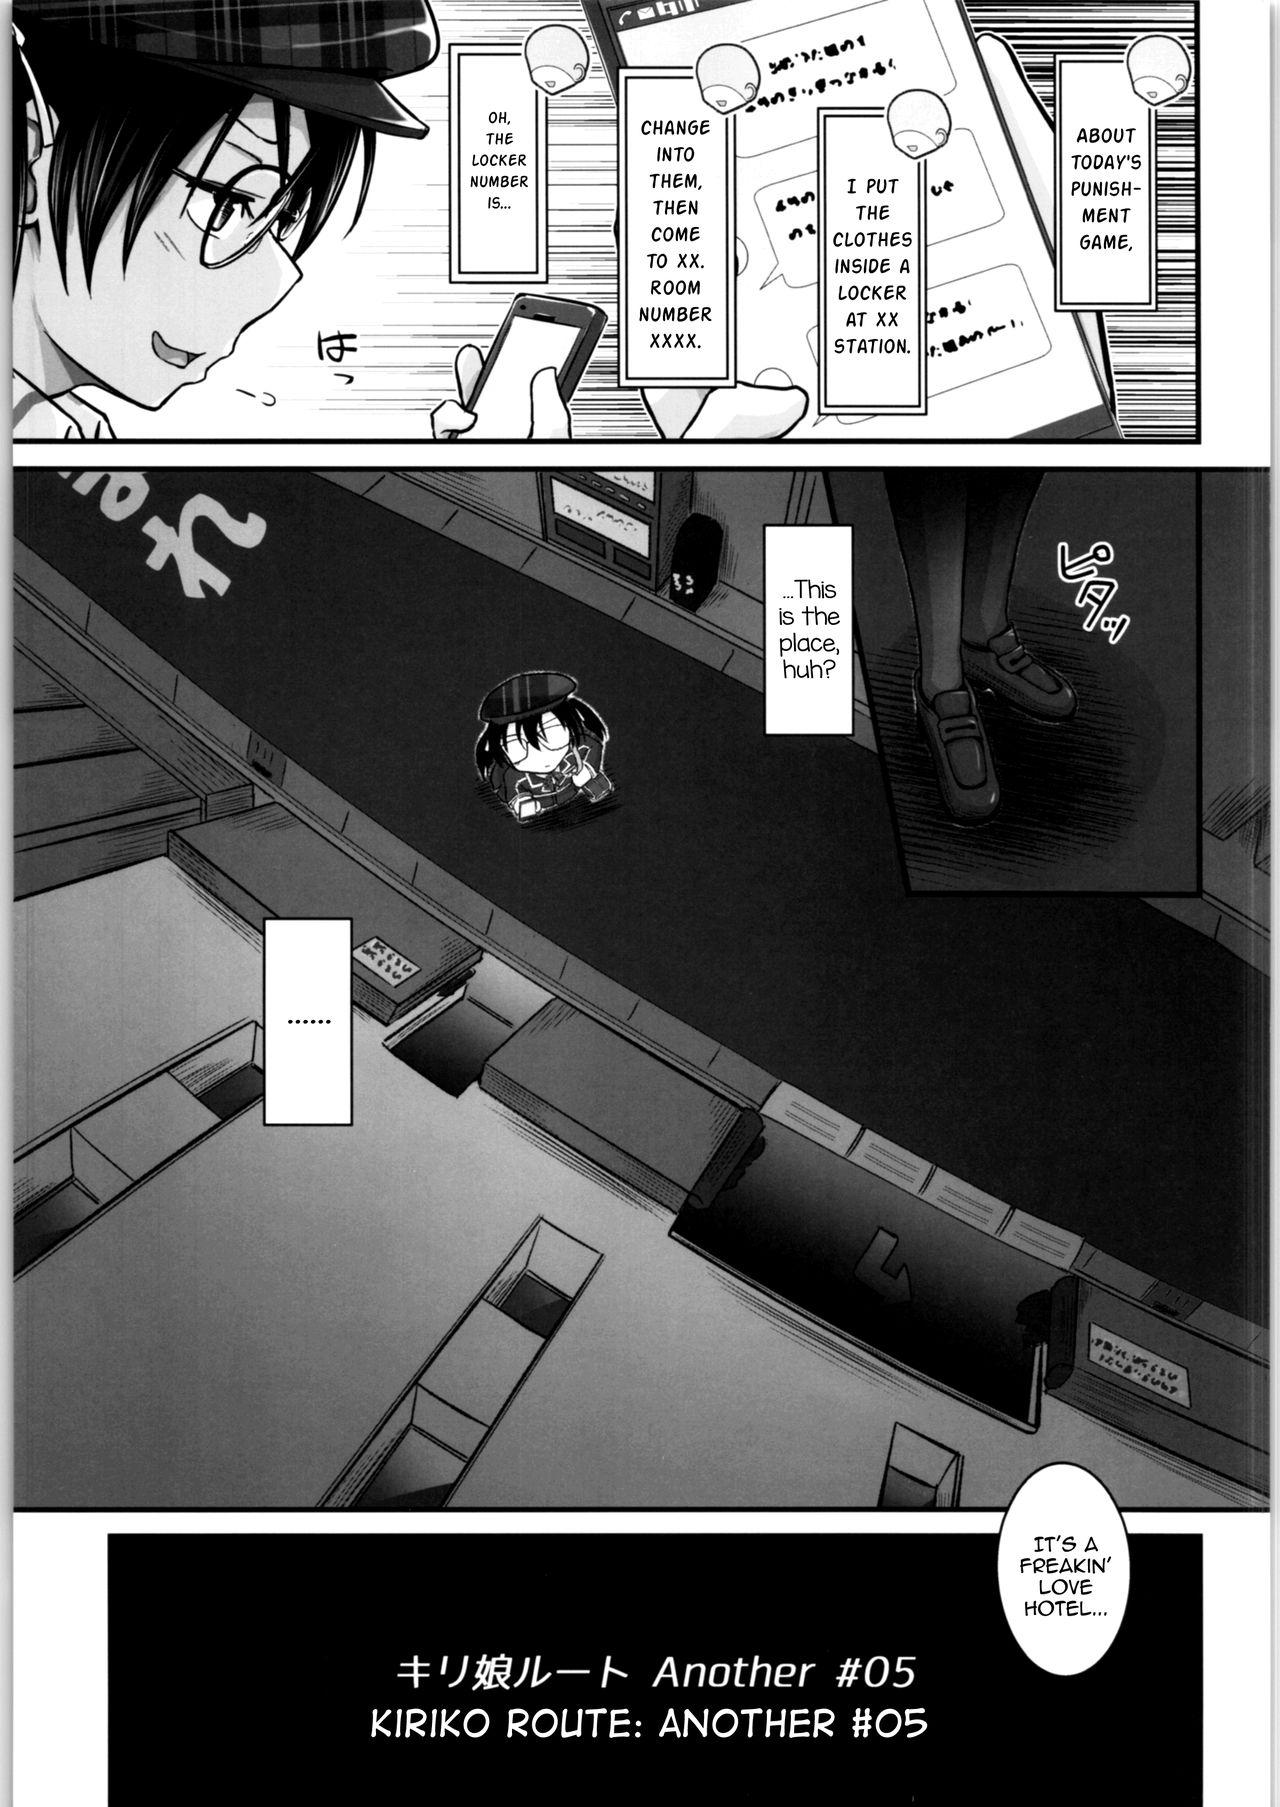 Mama Kiriko Route Another #05 - Sword art online Coeds - Page 4